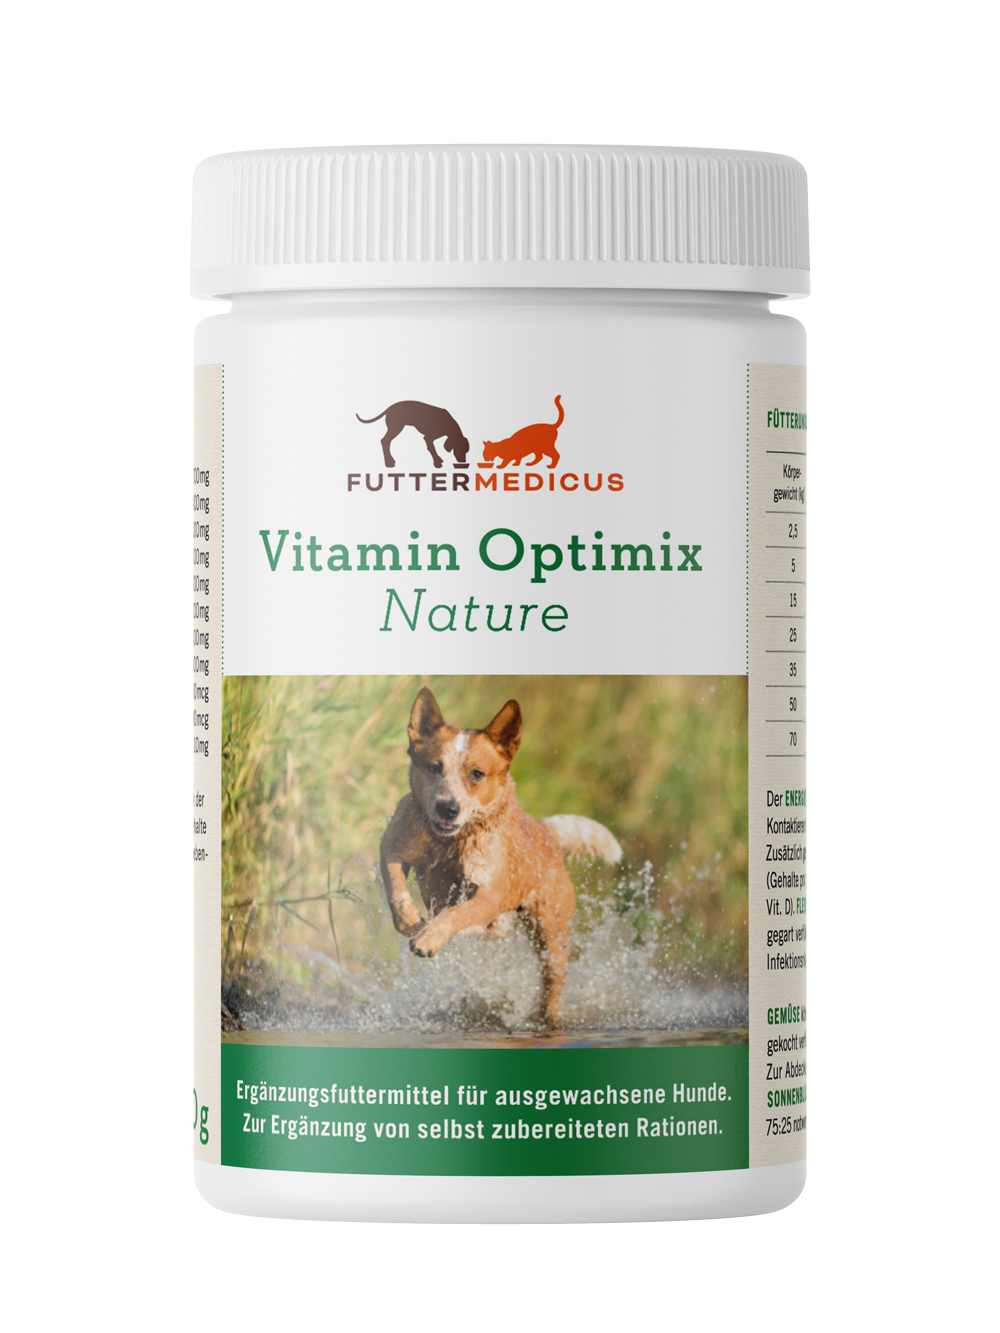 Feed additive dogs for BARFing and